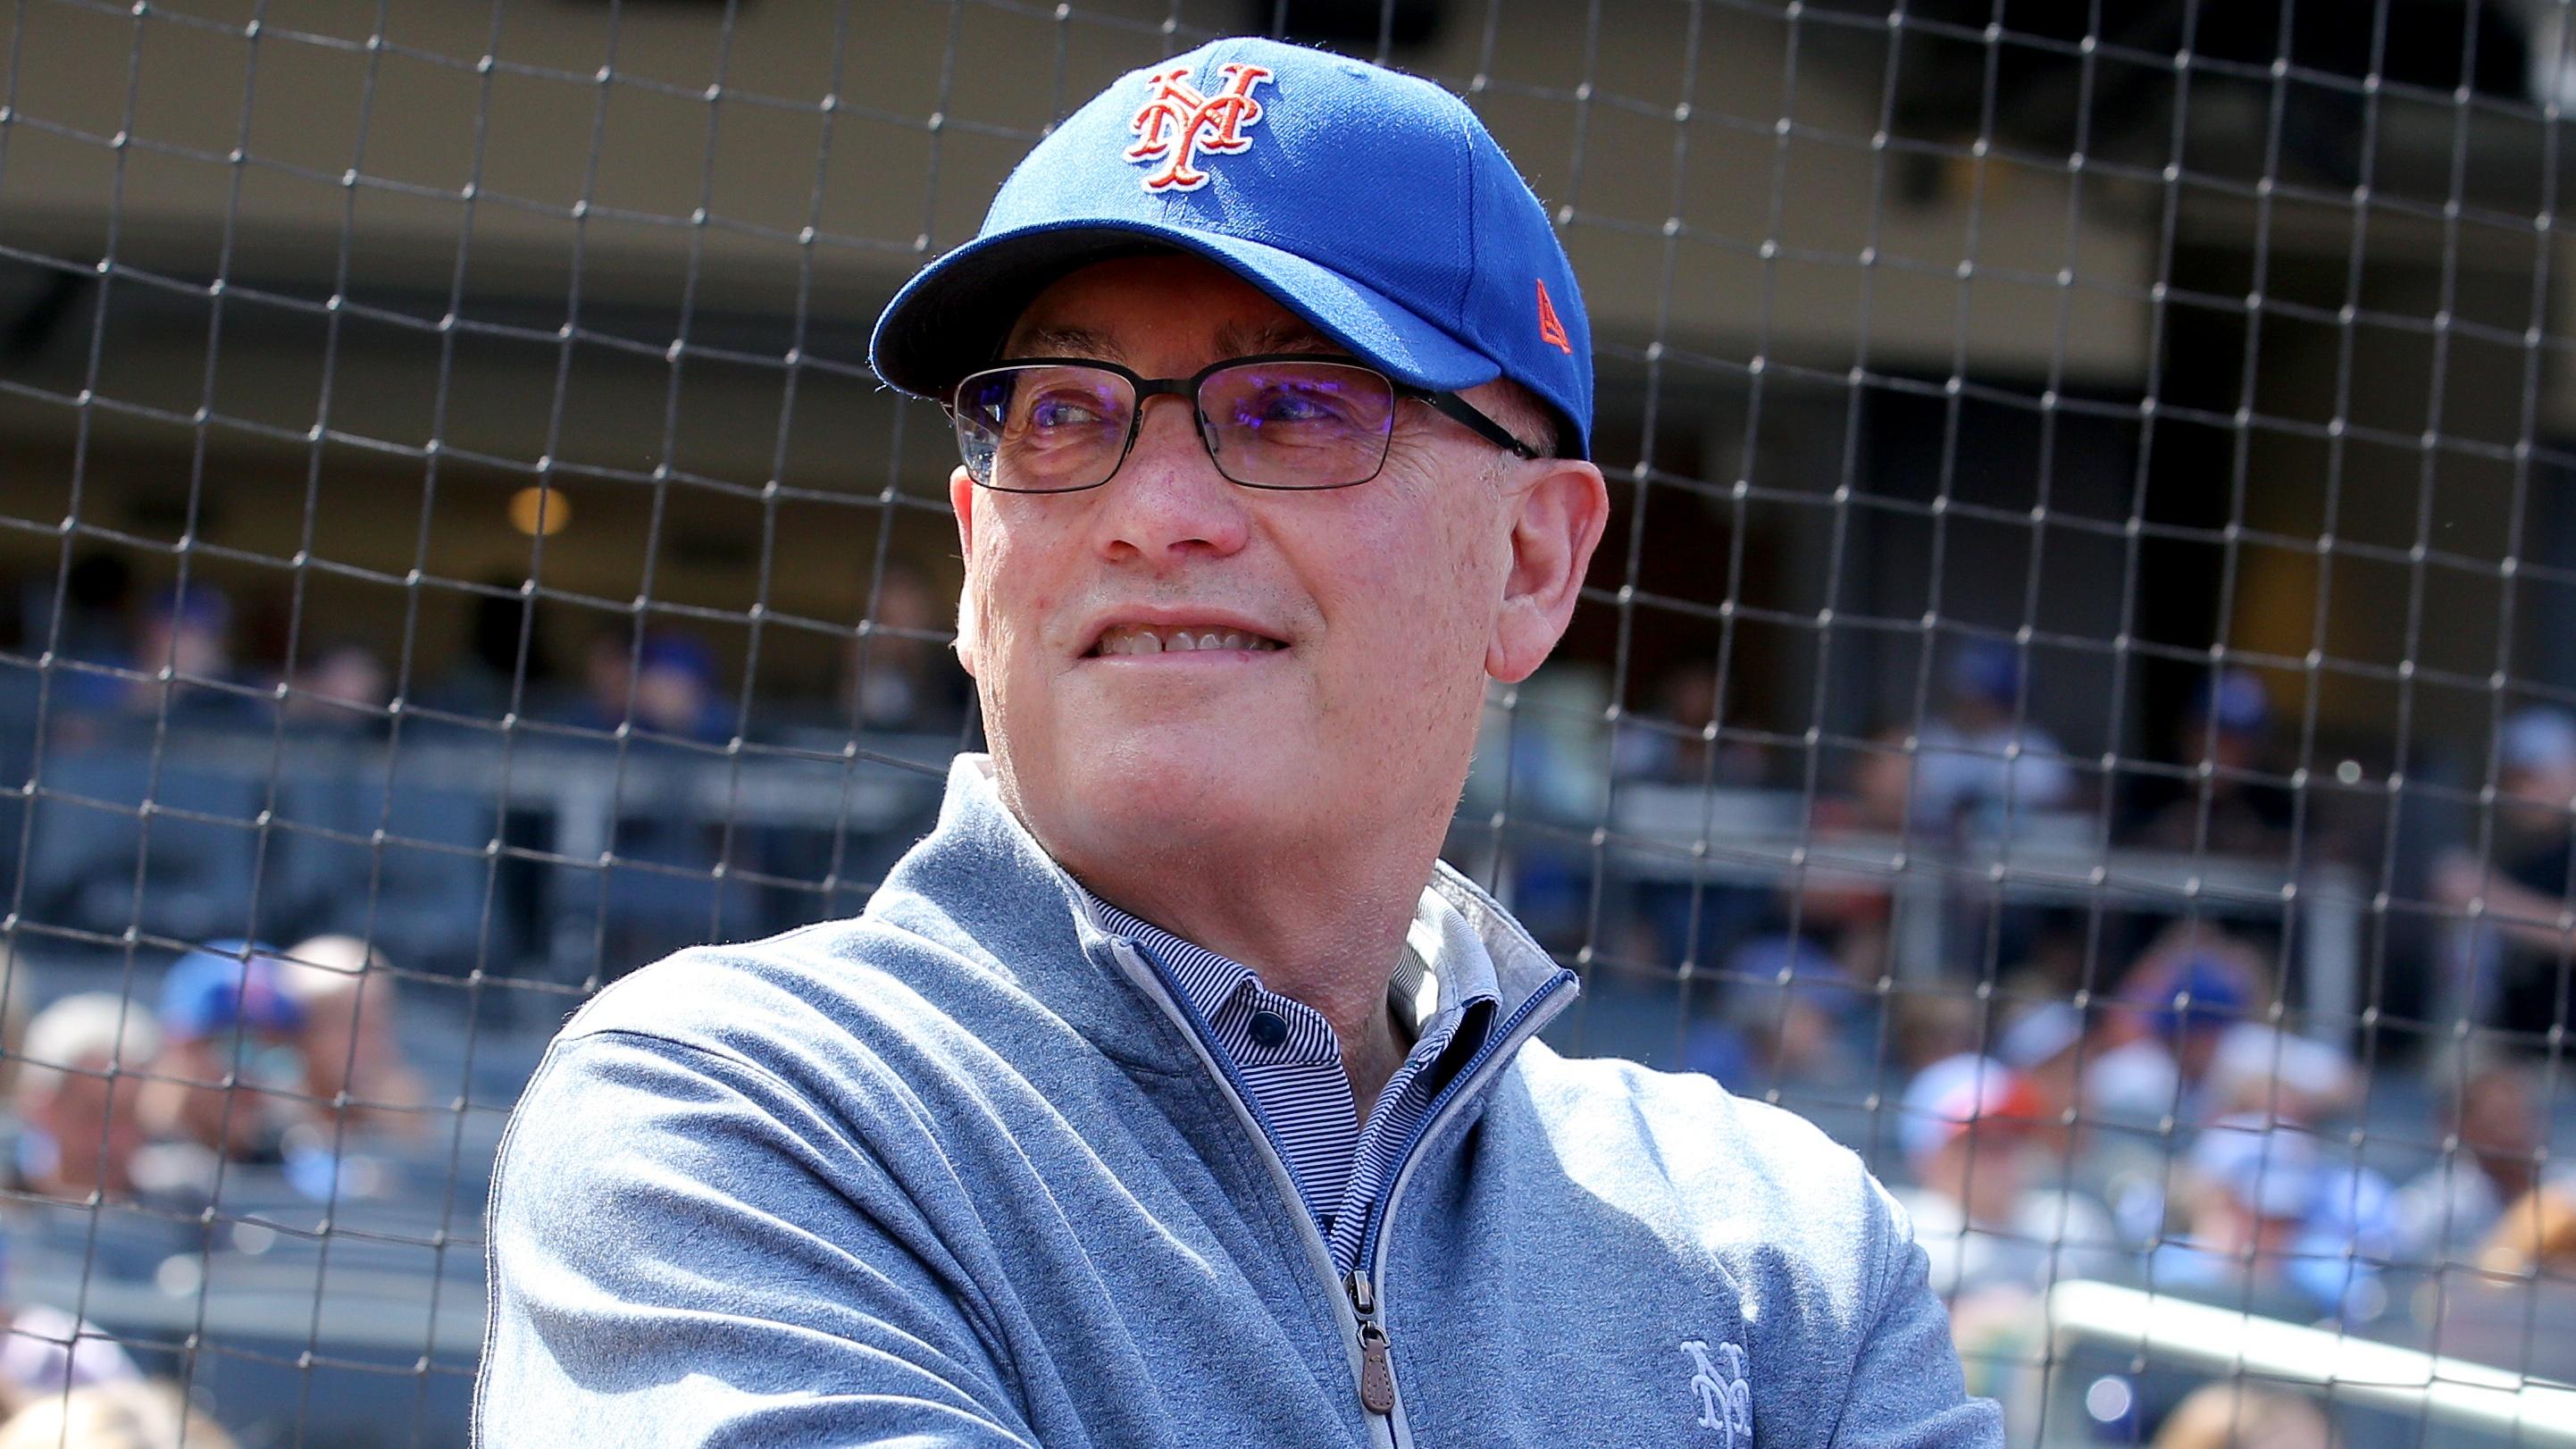 Sep 17, 2023; New York City, New York, USA; New York Mets owner Steve Cohen on the field before a game against the Cincinnati Reds at Citi Field. Mandatory Credit: Brad Penner-USA TODAY Sports / © Brad Penner-USA TODAY Sports